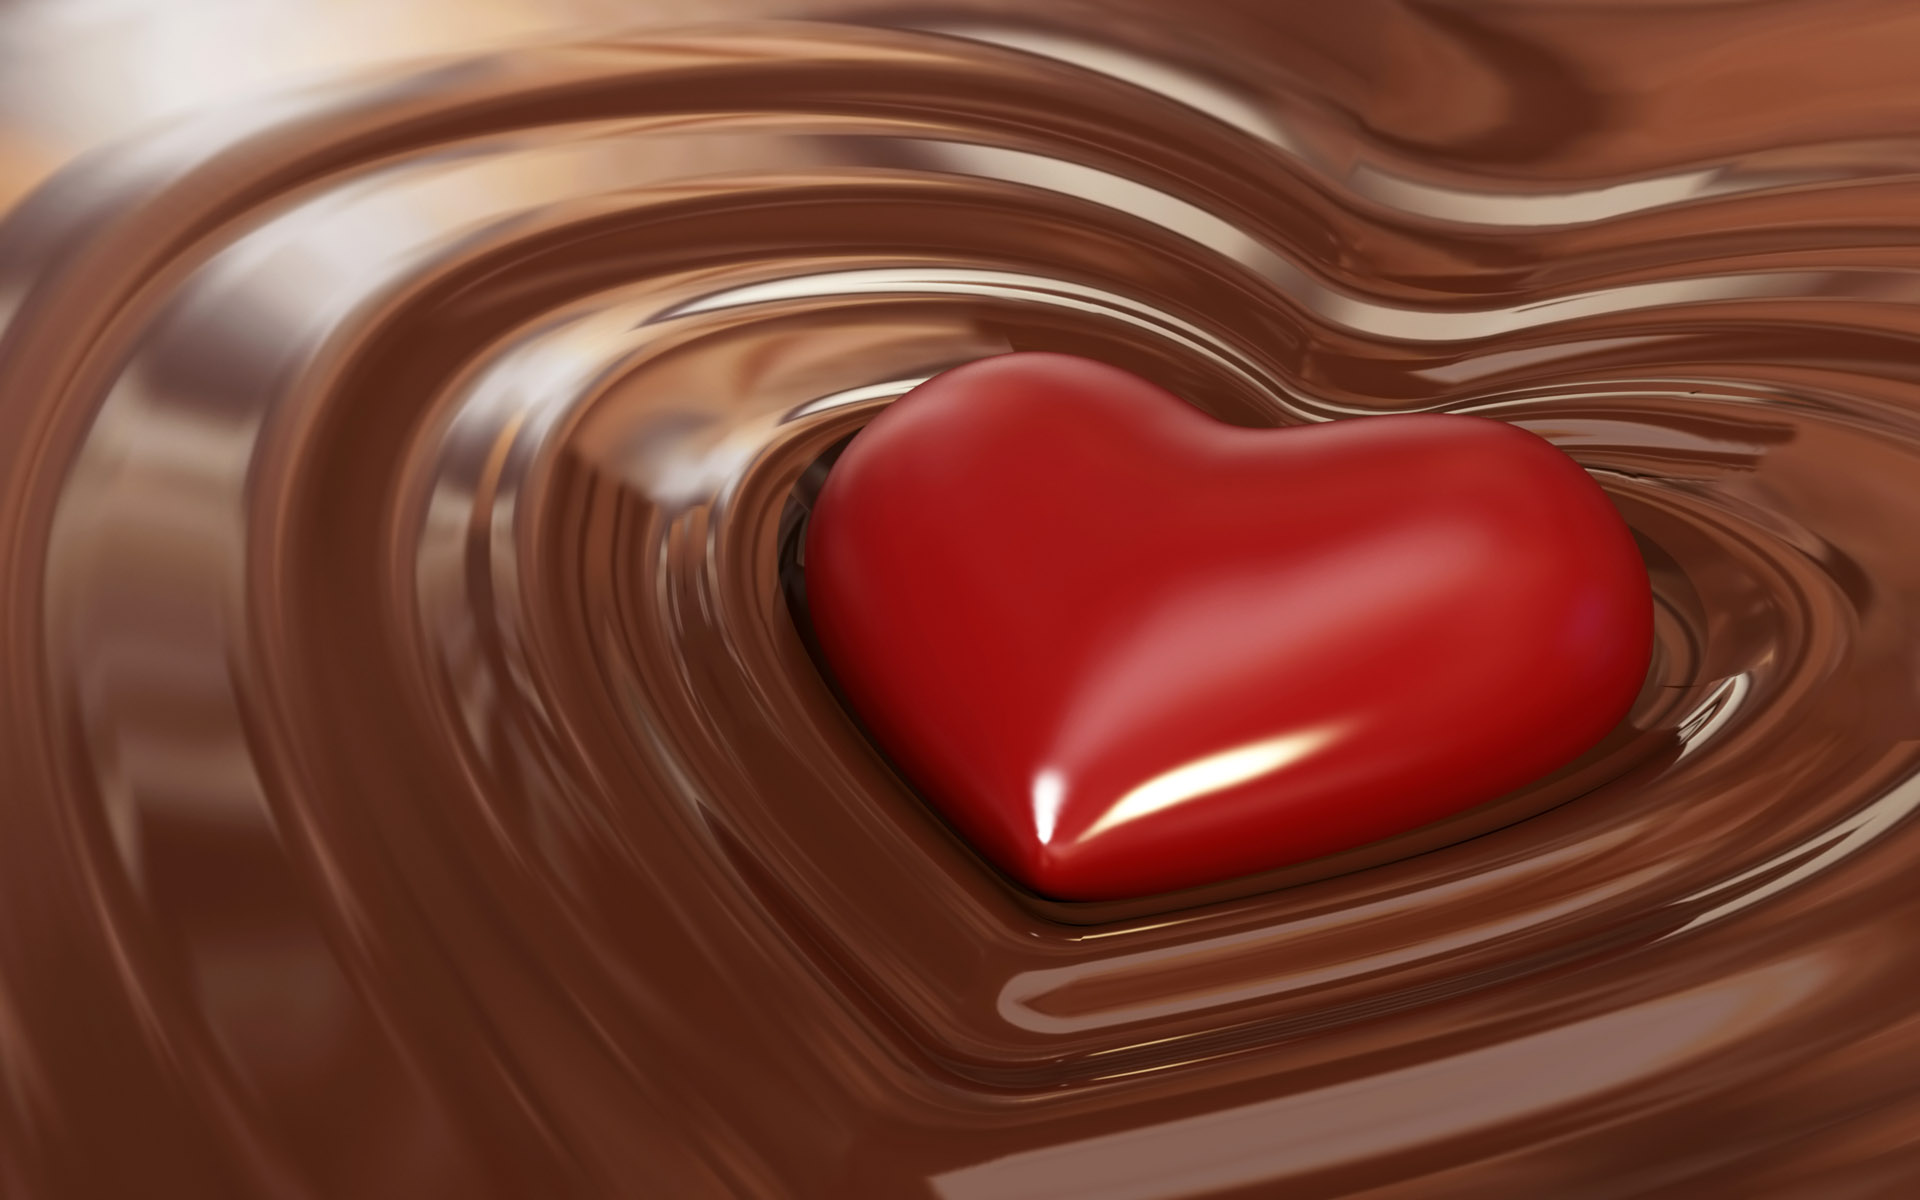 Chocolate Dessert Mobile Phone Wallpaper Images Free Download on Lovepik   400529256